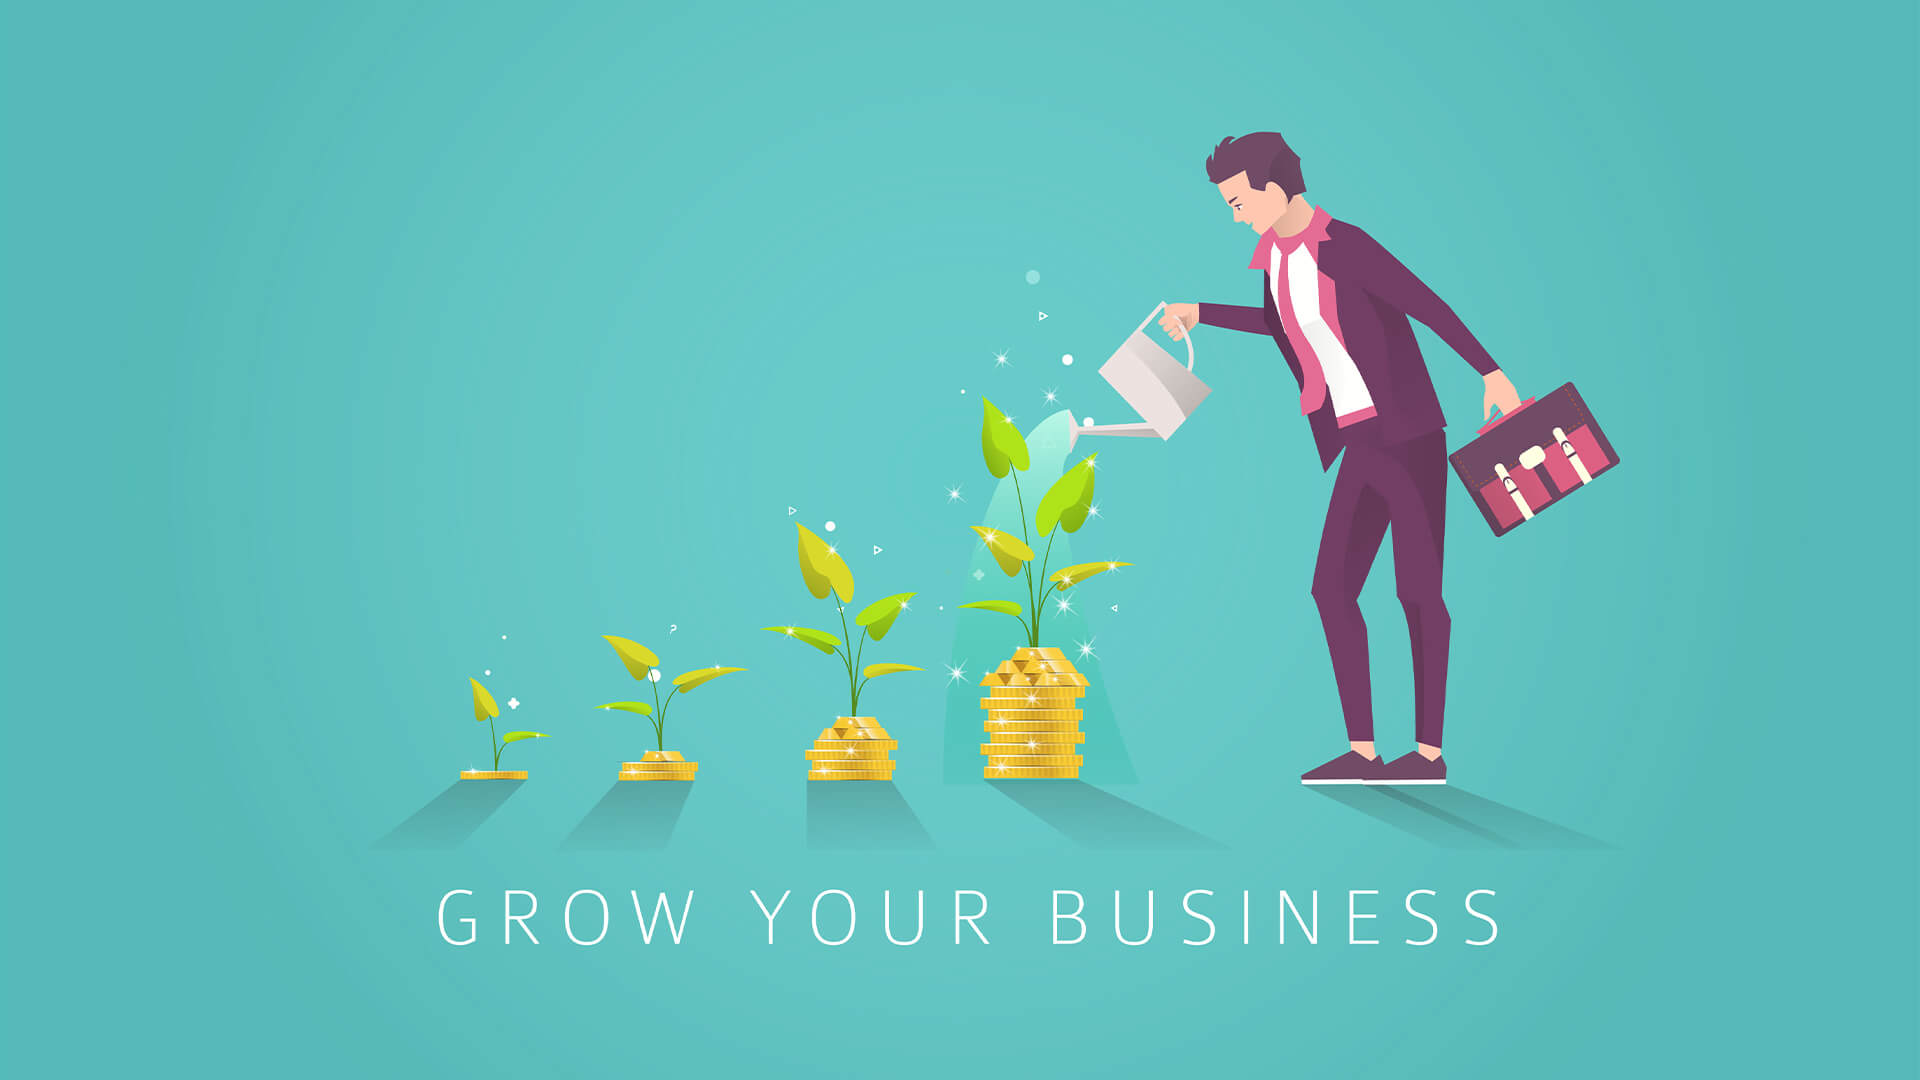 3 Tips to Grow Your Business Faster - Corporate Vision Magazine